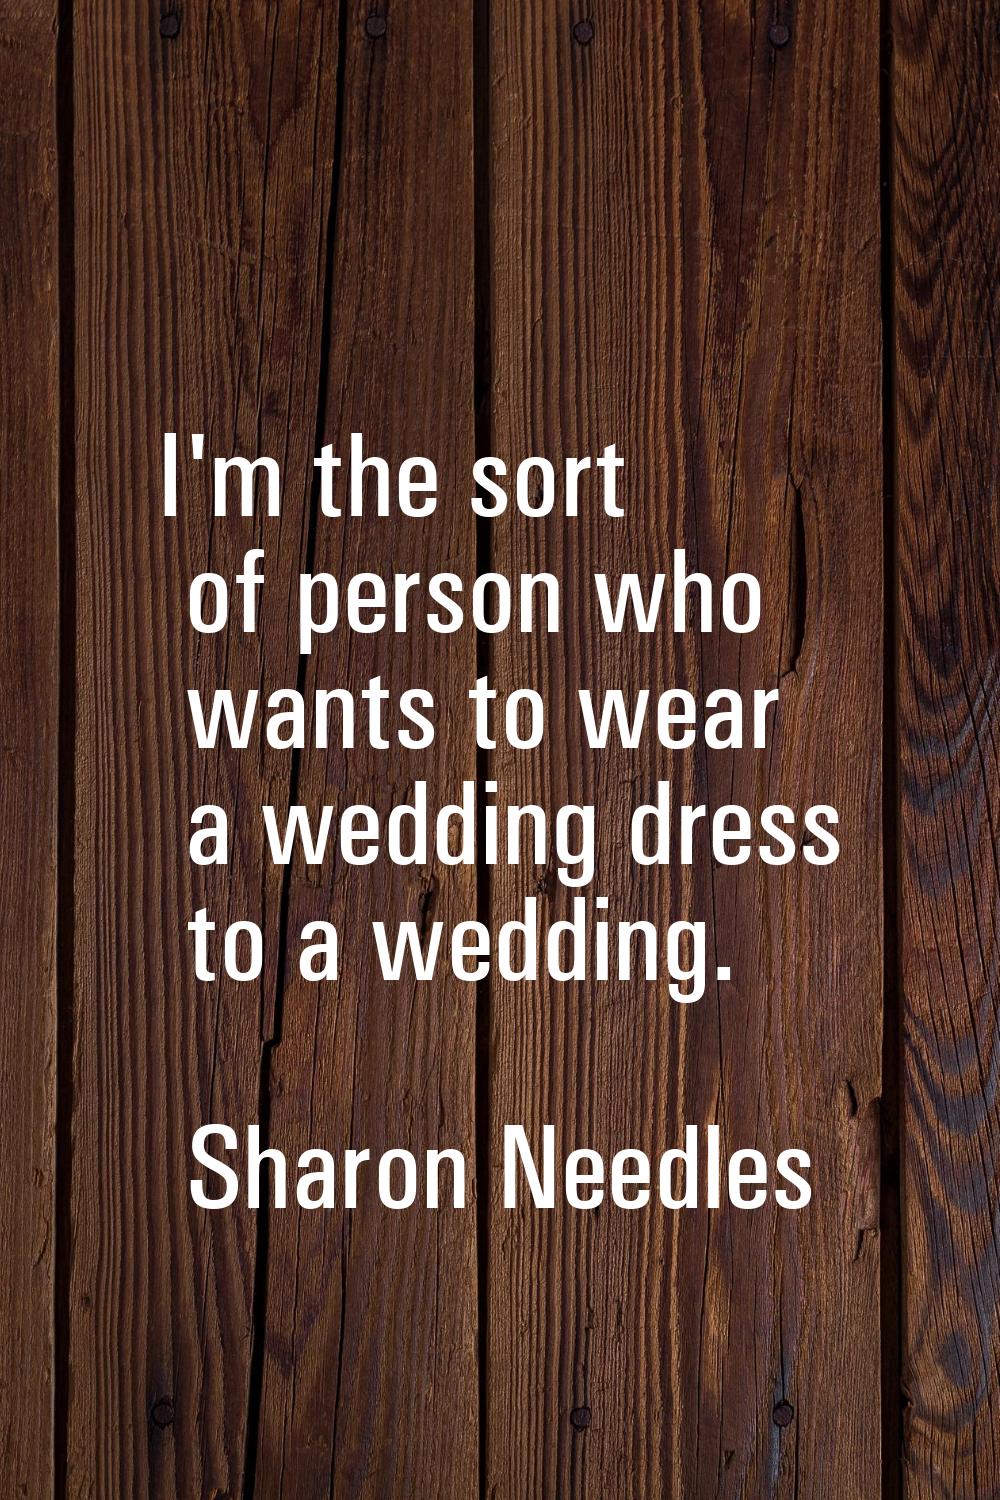 I'm the sort of person who wants to wear a wedding dress to a wedding.